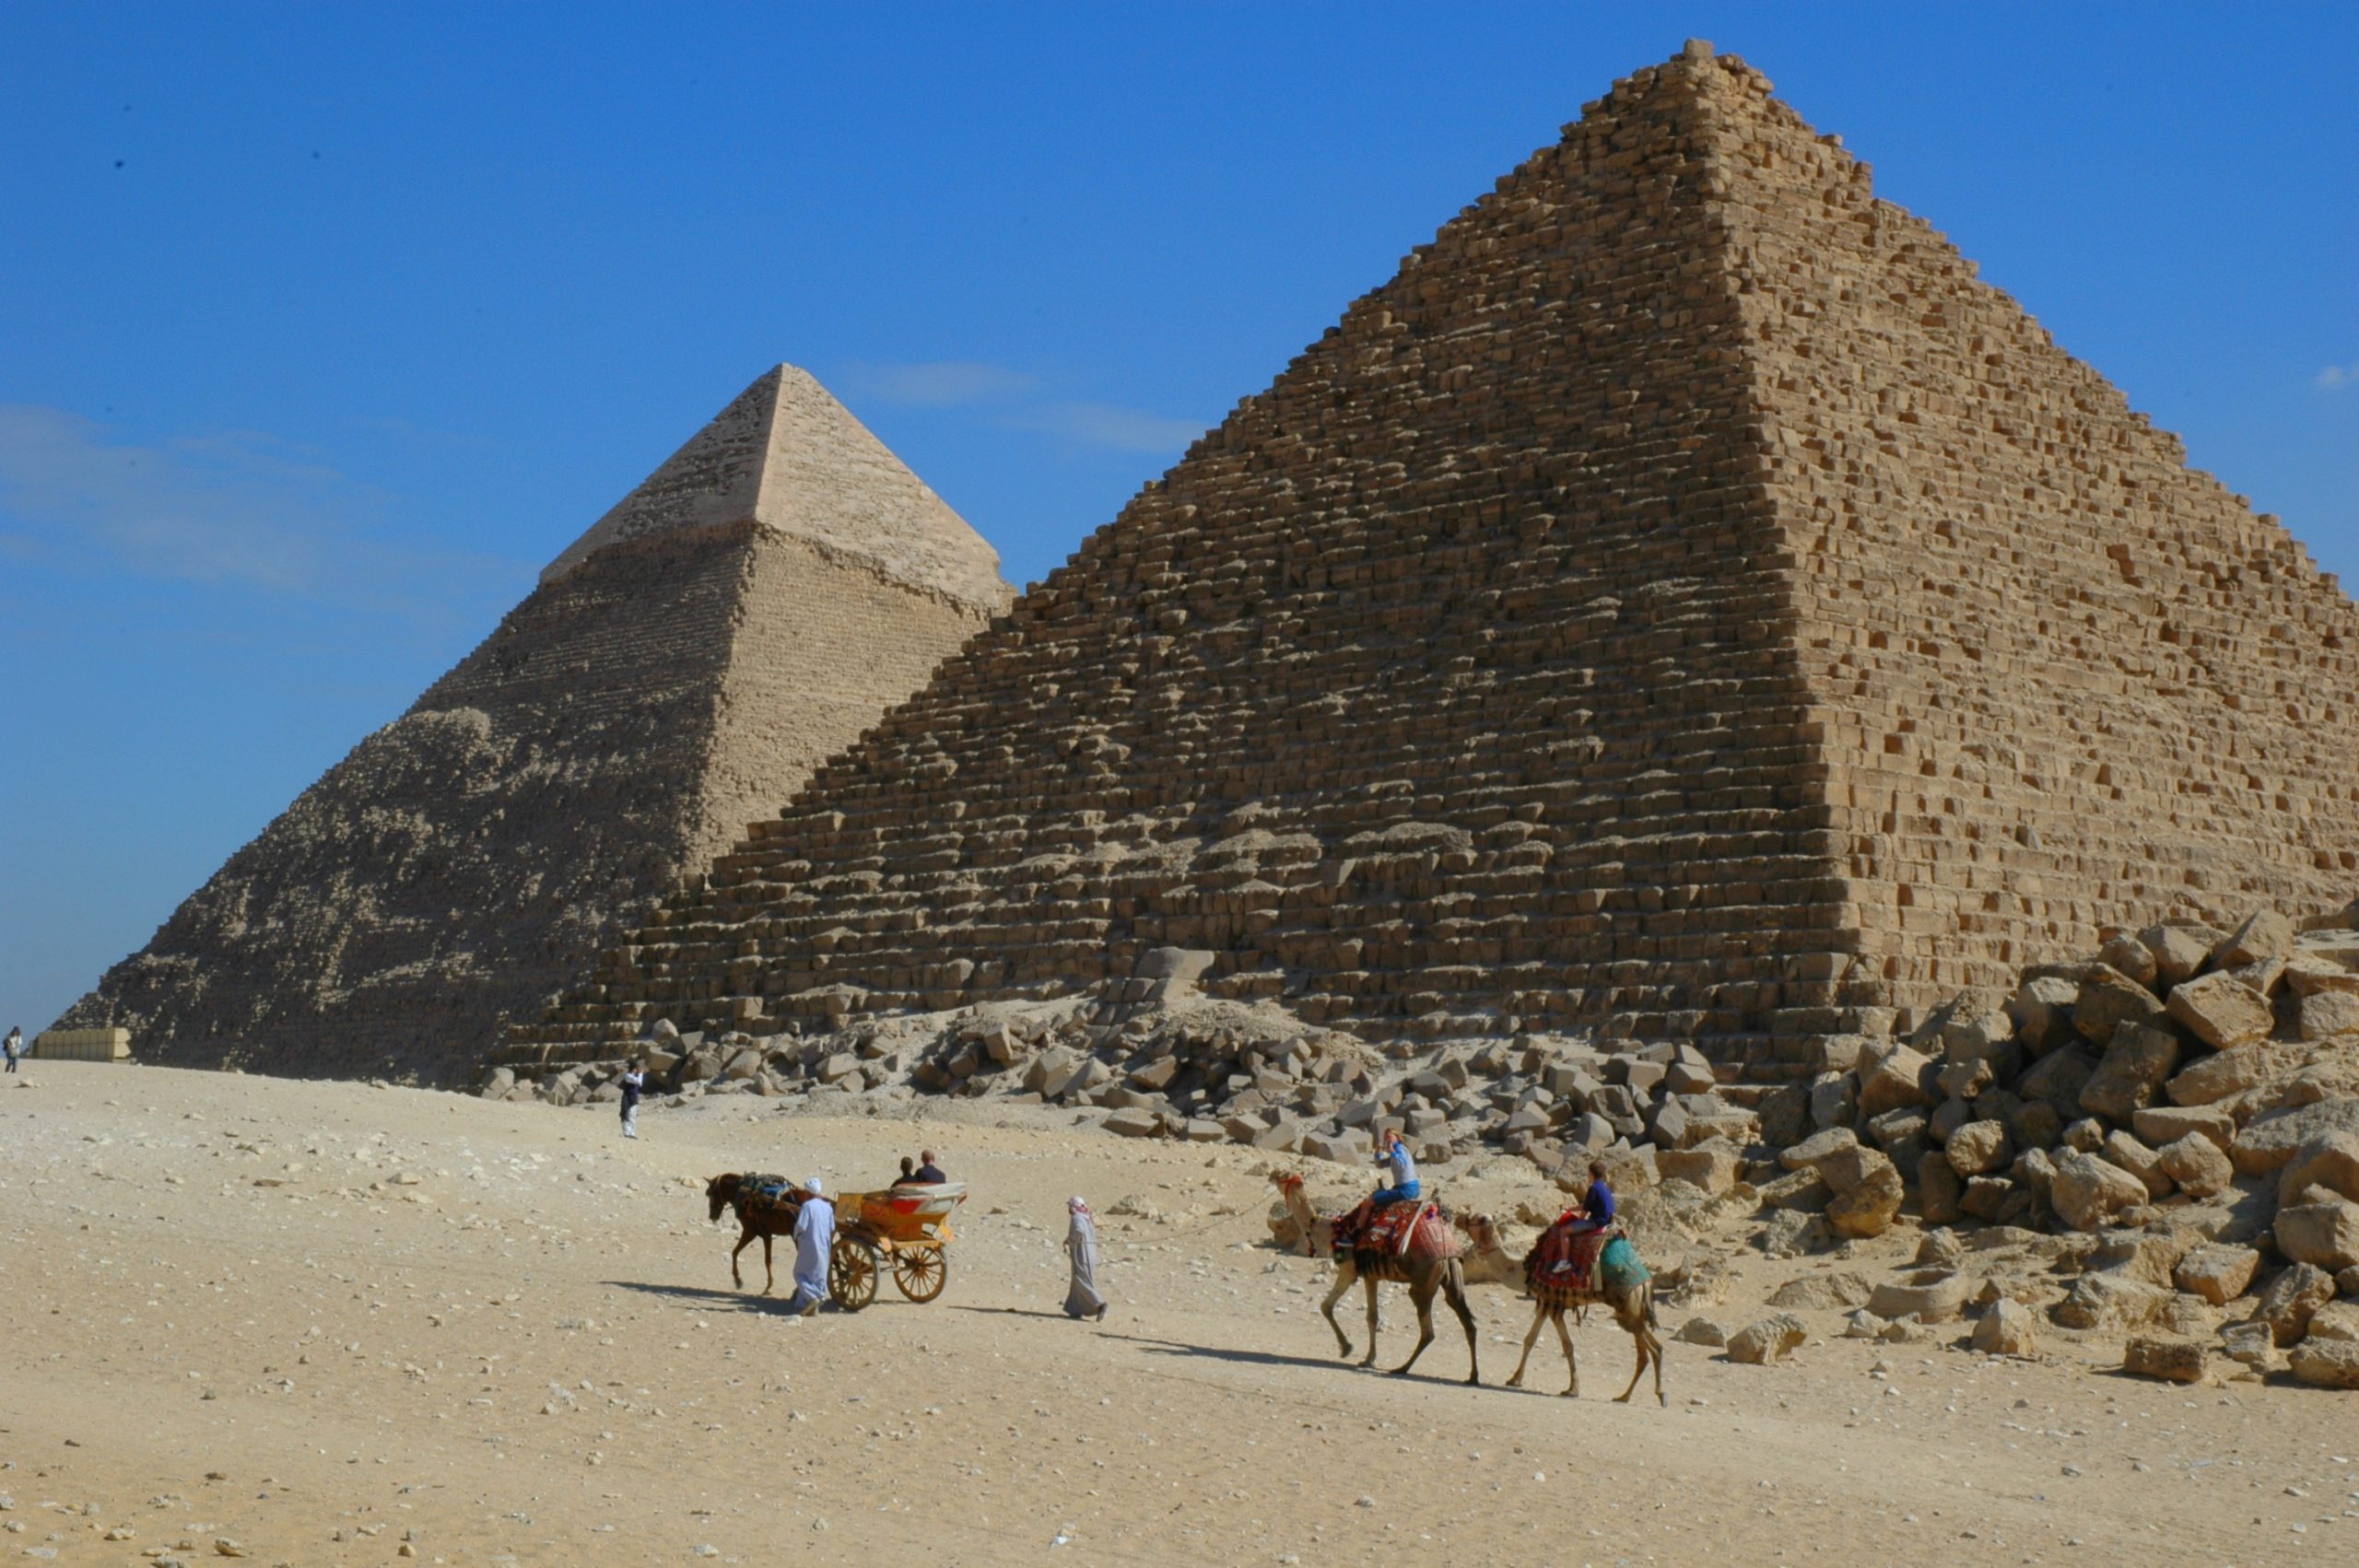 The image is a photograph of people riding camels in front of two pyramids in Egypt.